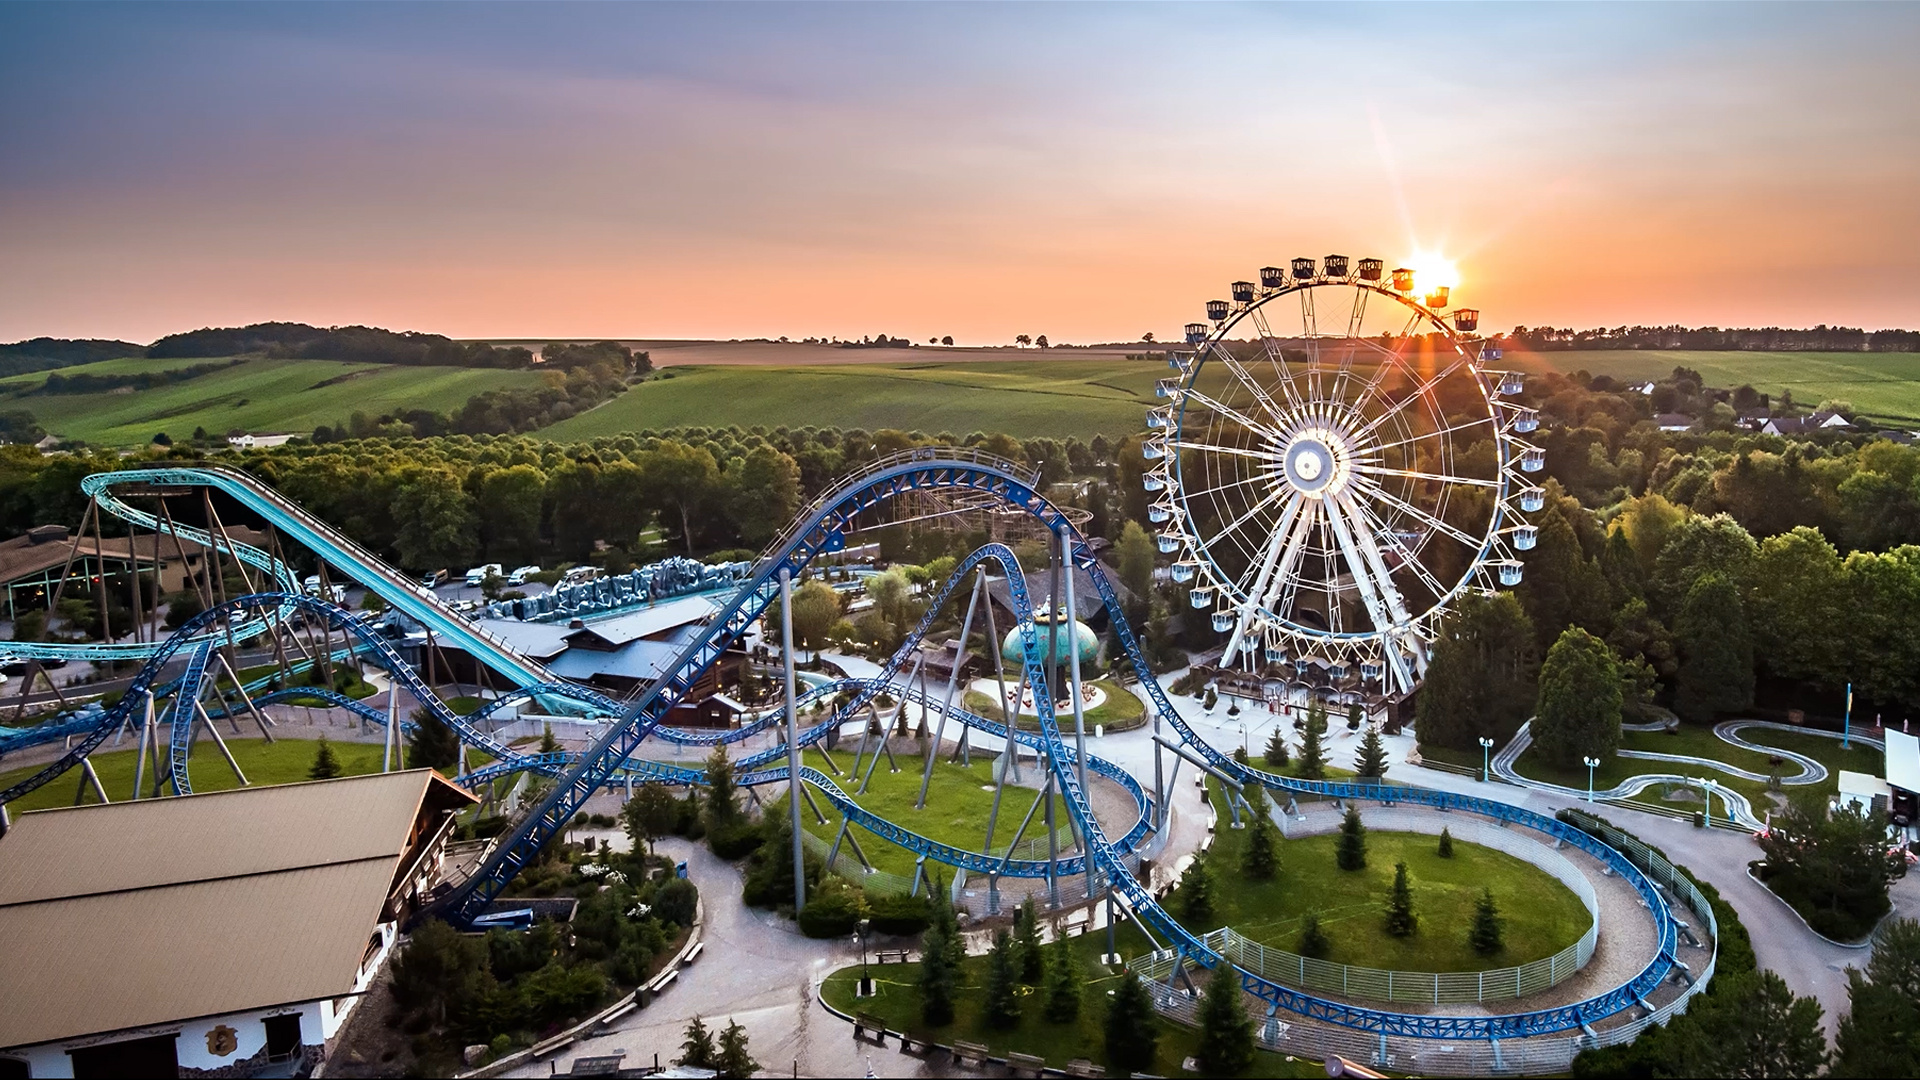 Amusement Park: Nigloland, France, A venue to enjoy rides, and other activities. 1920x1080 Full HD Background.